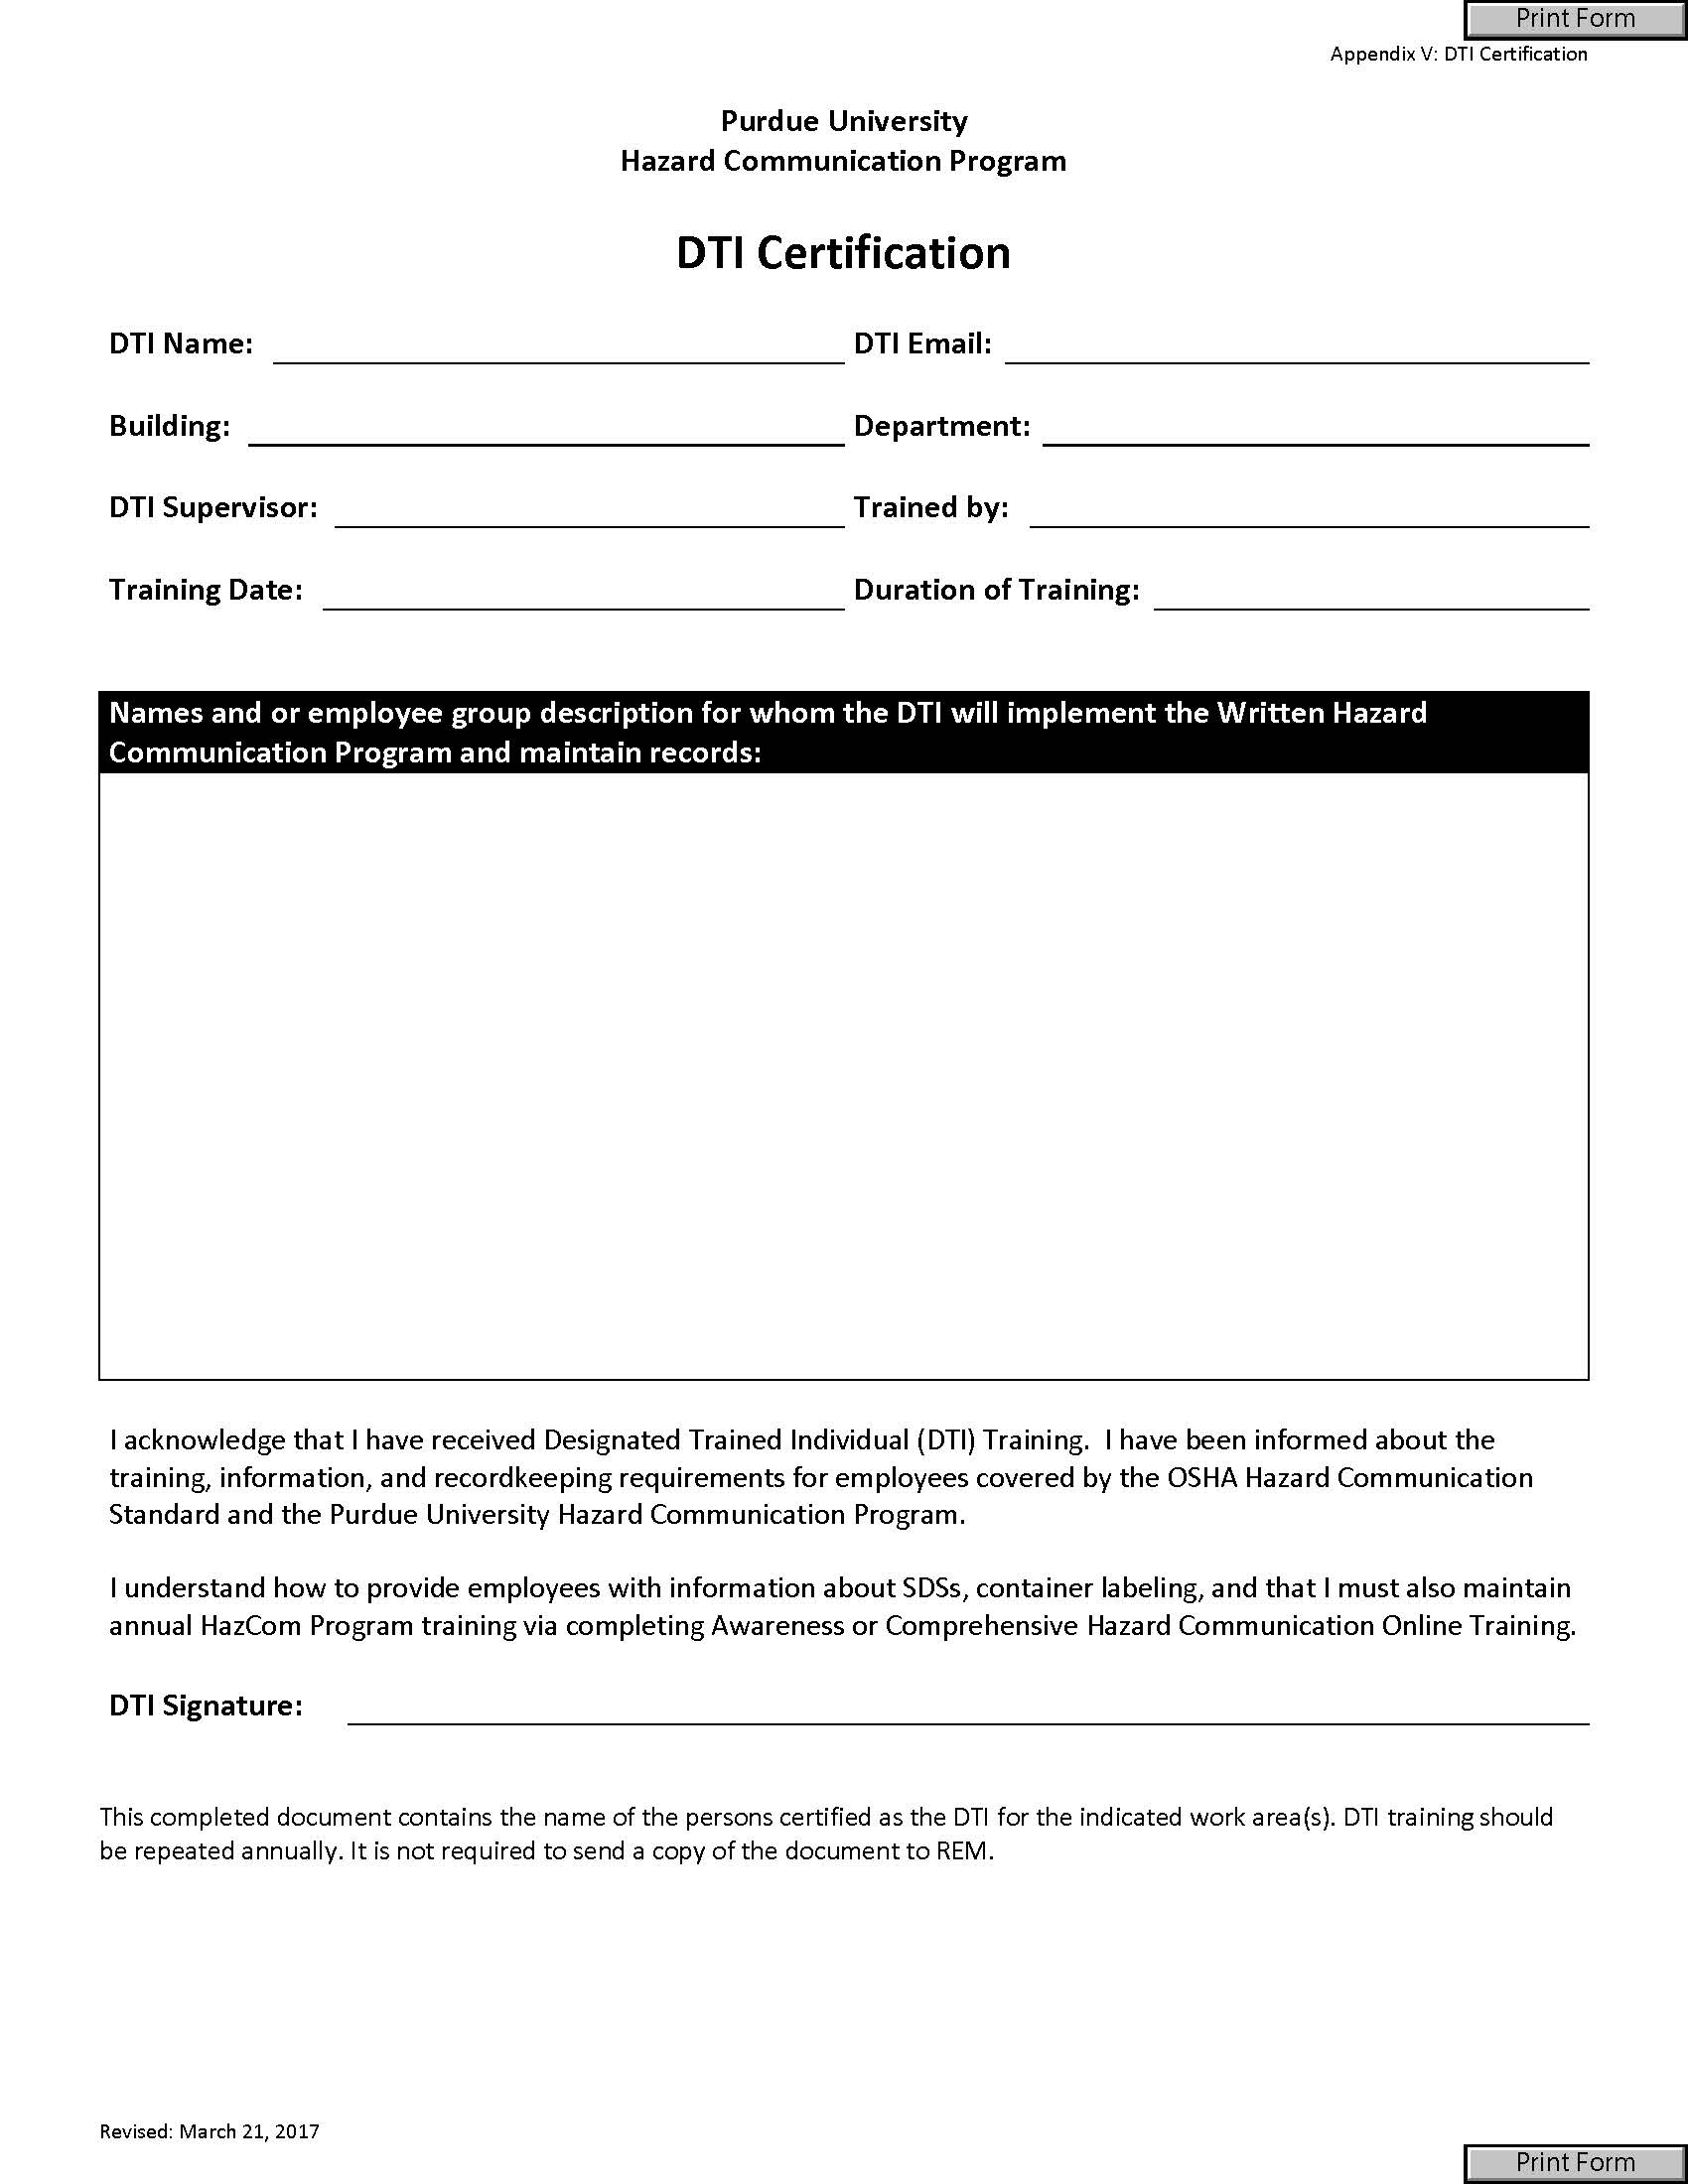 image of DTI certification form